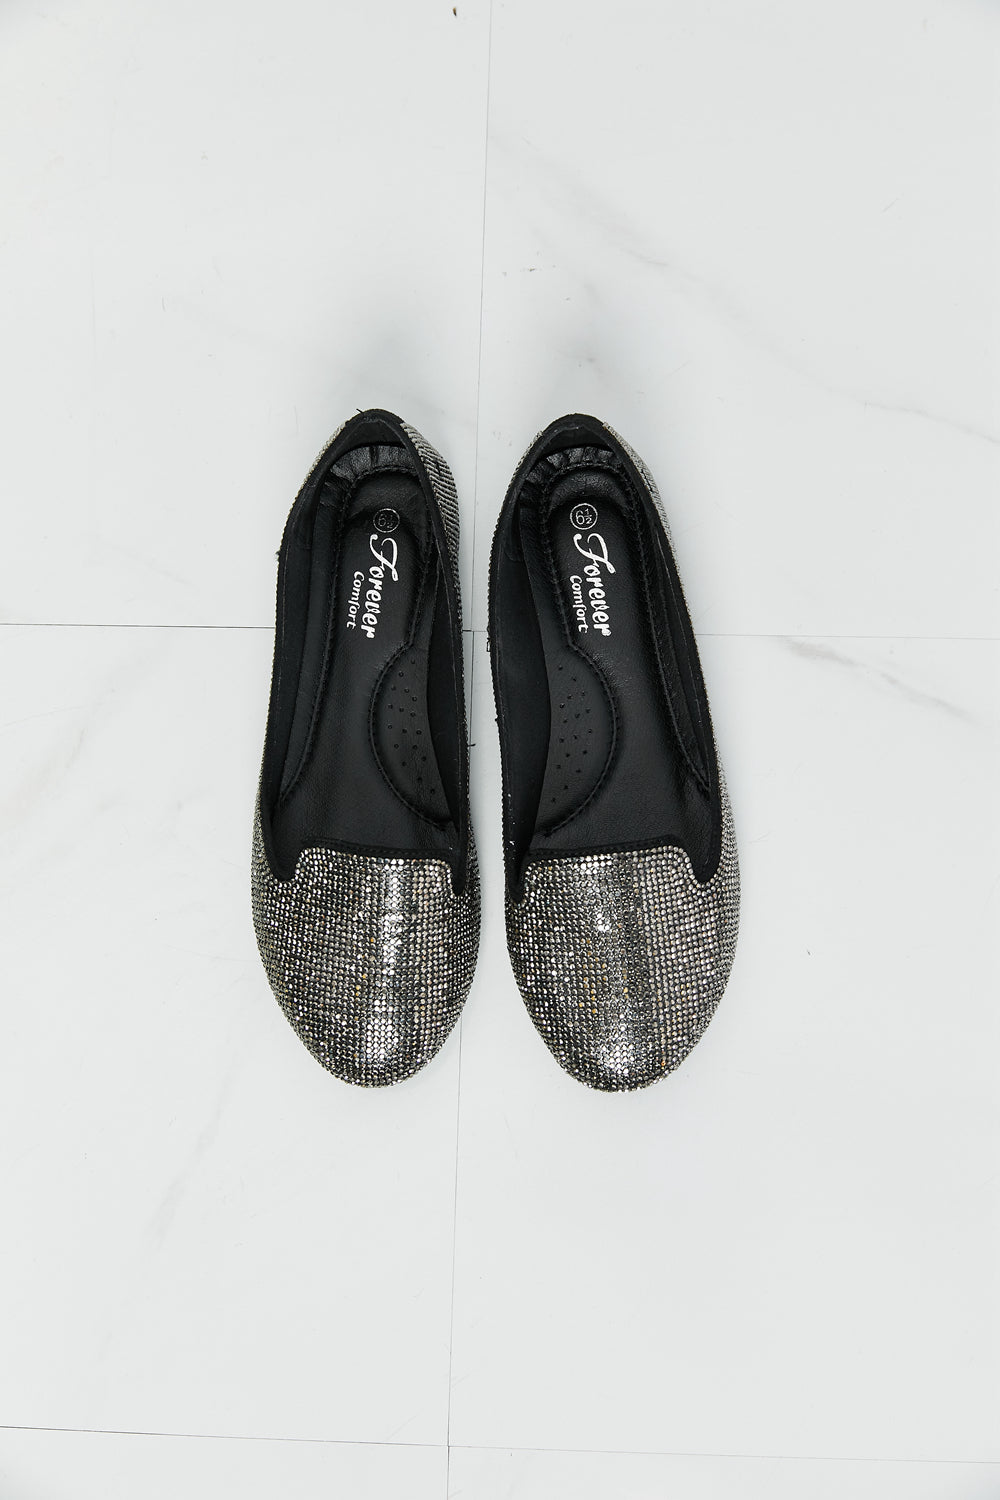 Forever Link Rhinestone Round Toe Flats in Black/Pewter